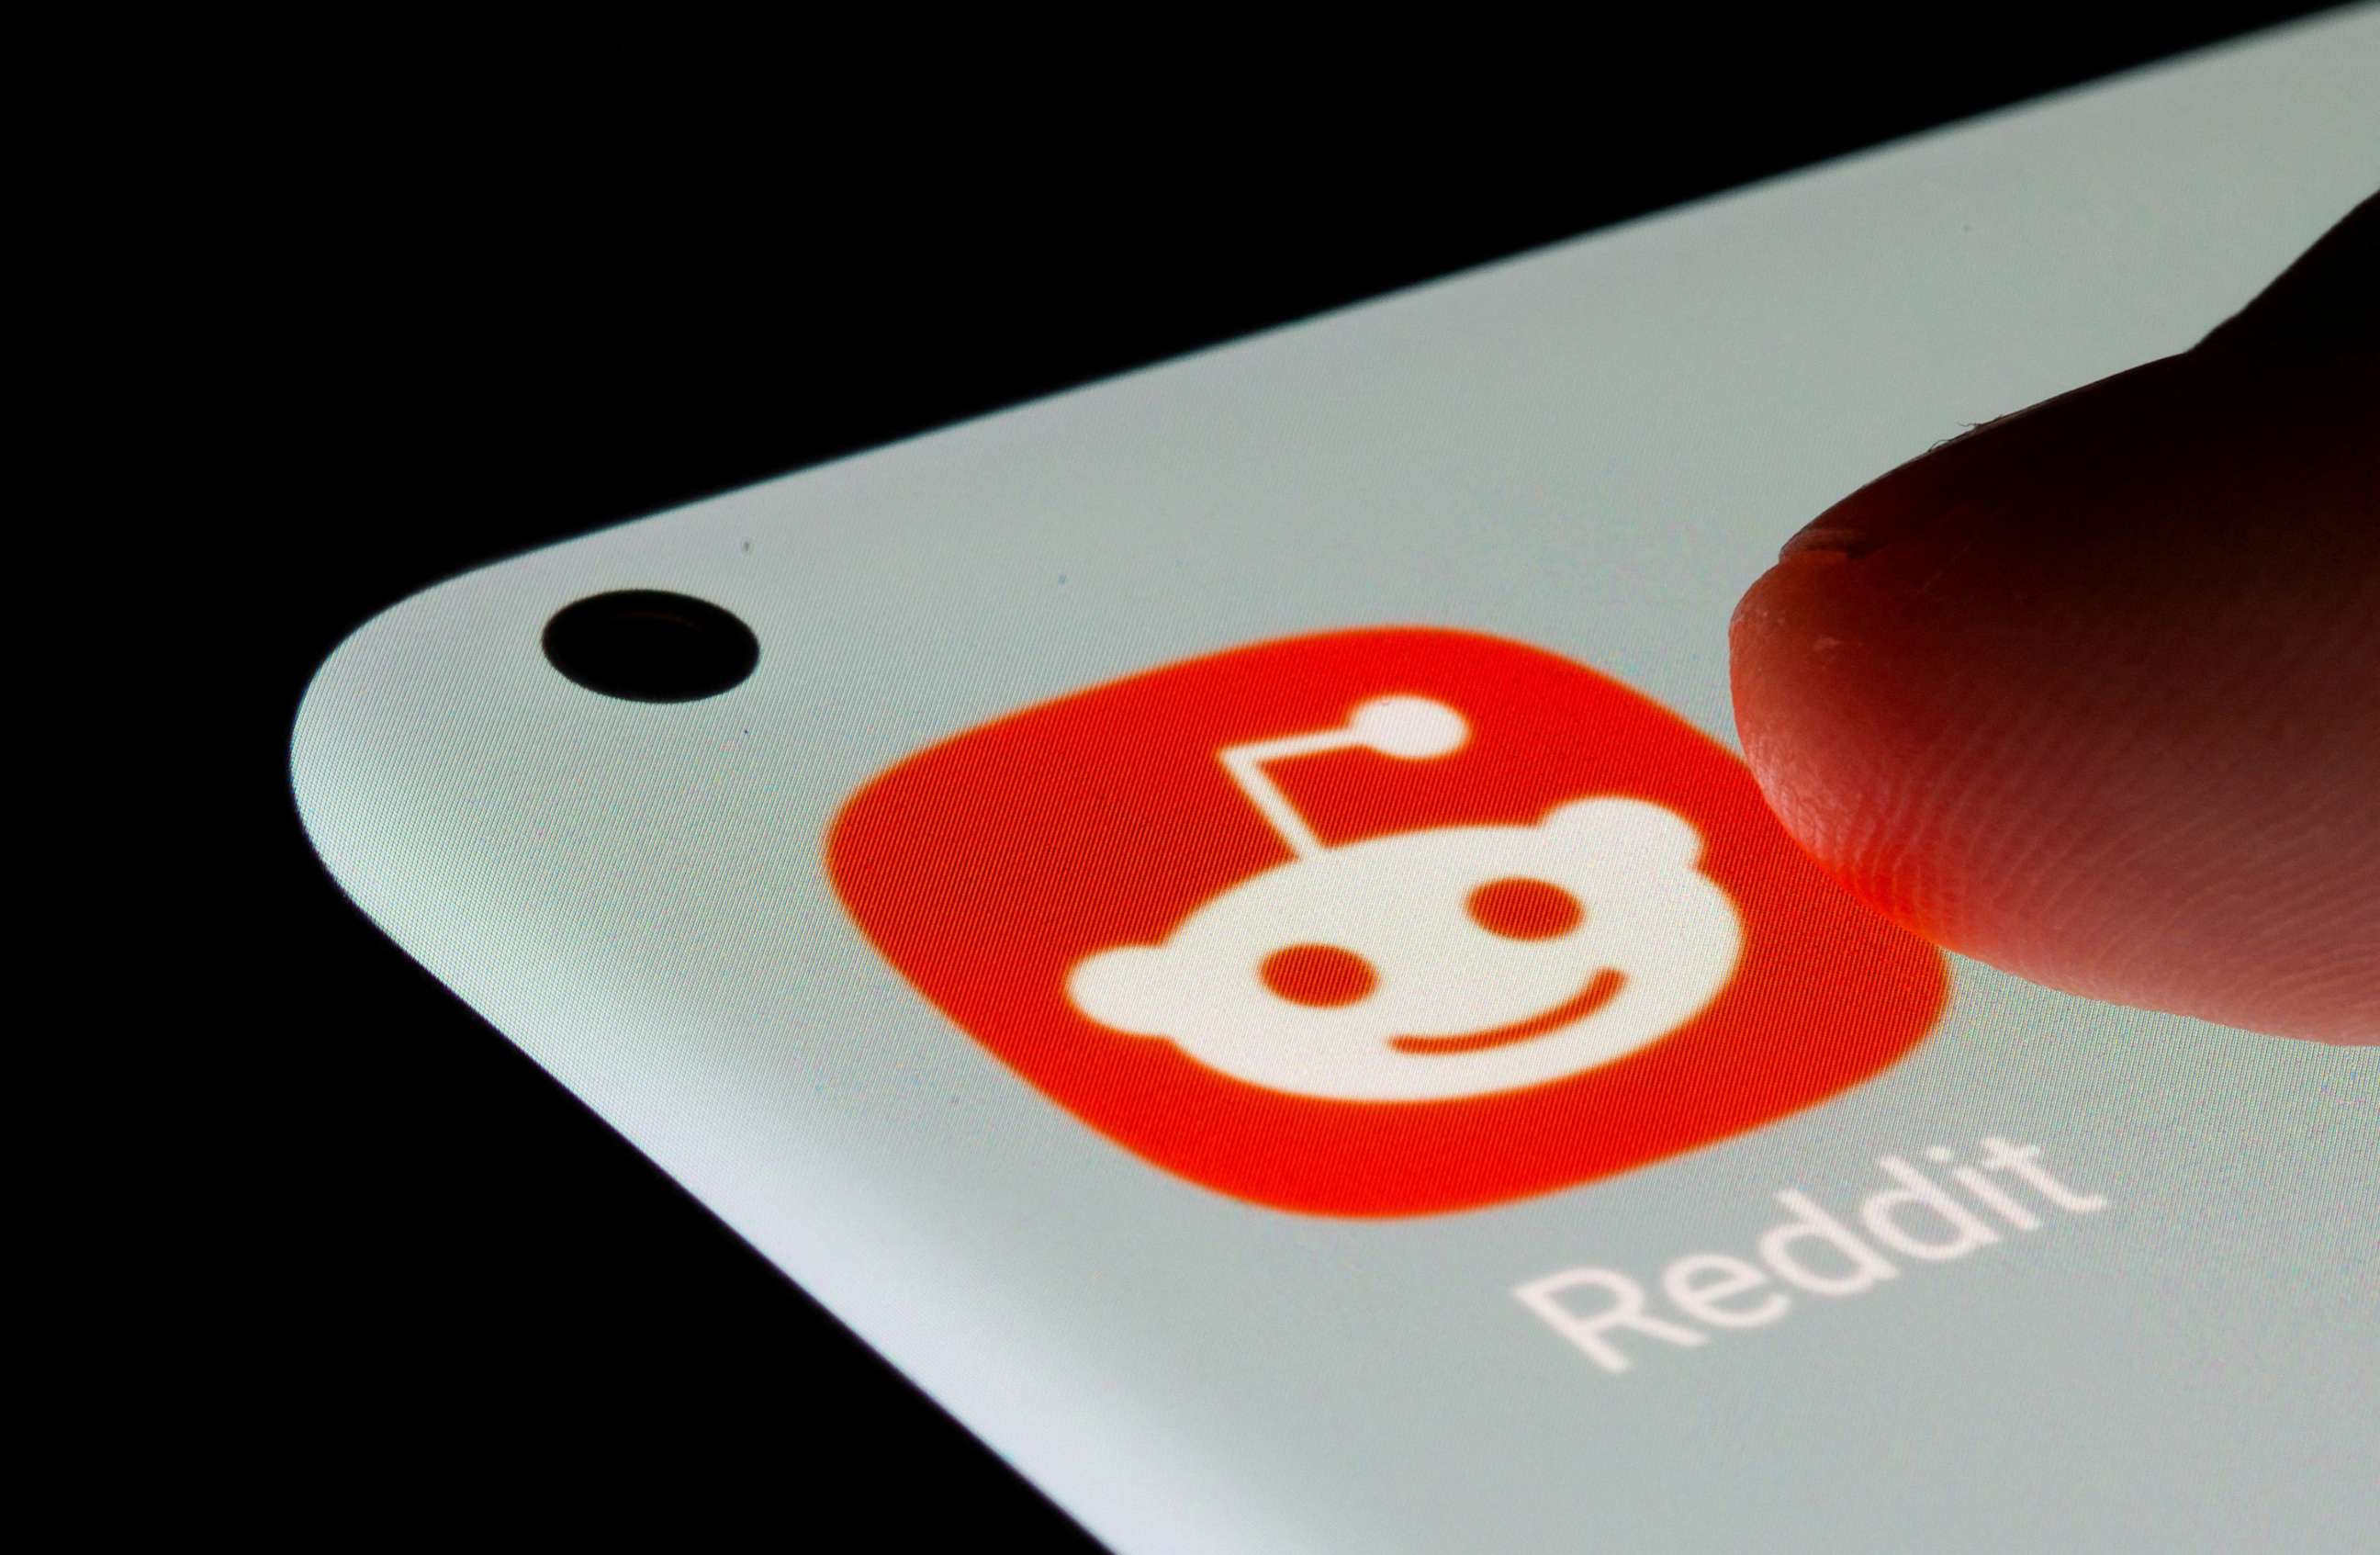 PHOTO: The Reddit app is seen on a smartphone, July 13, 2021.